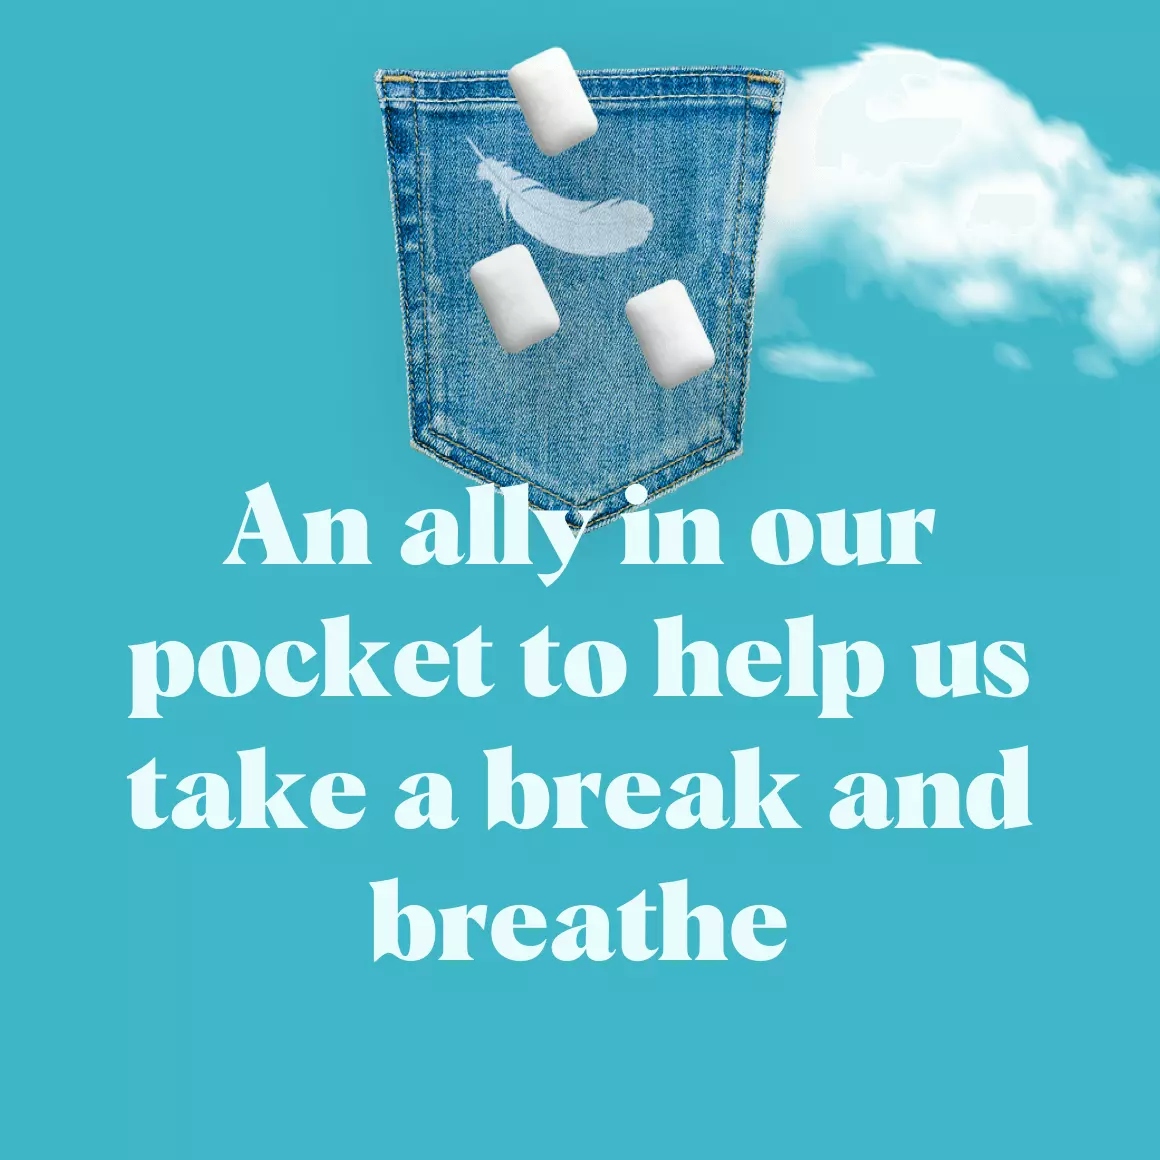 An ally in our pockets to help us take a break and breathe image